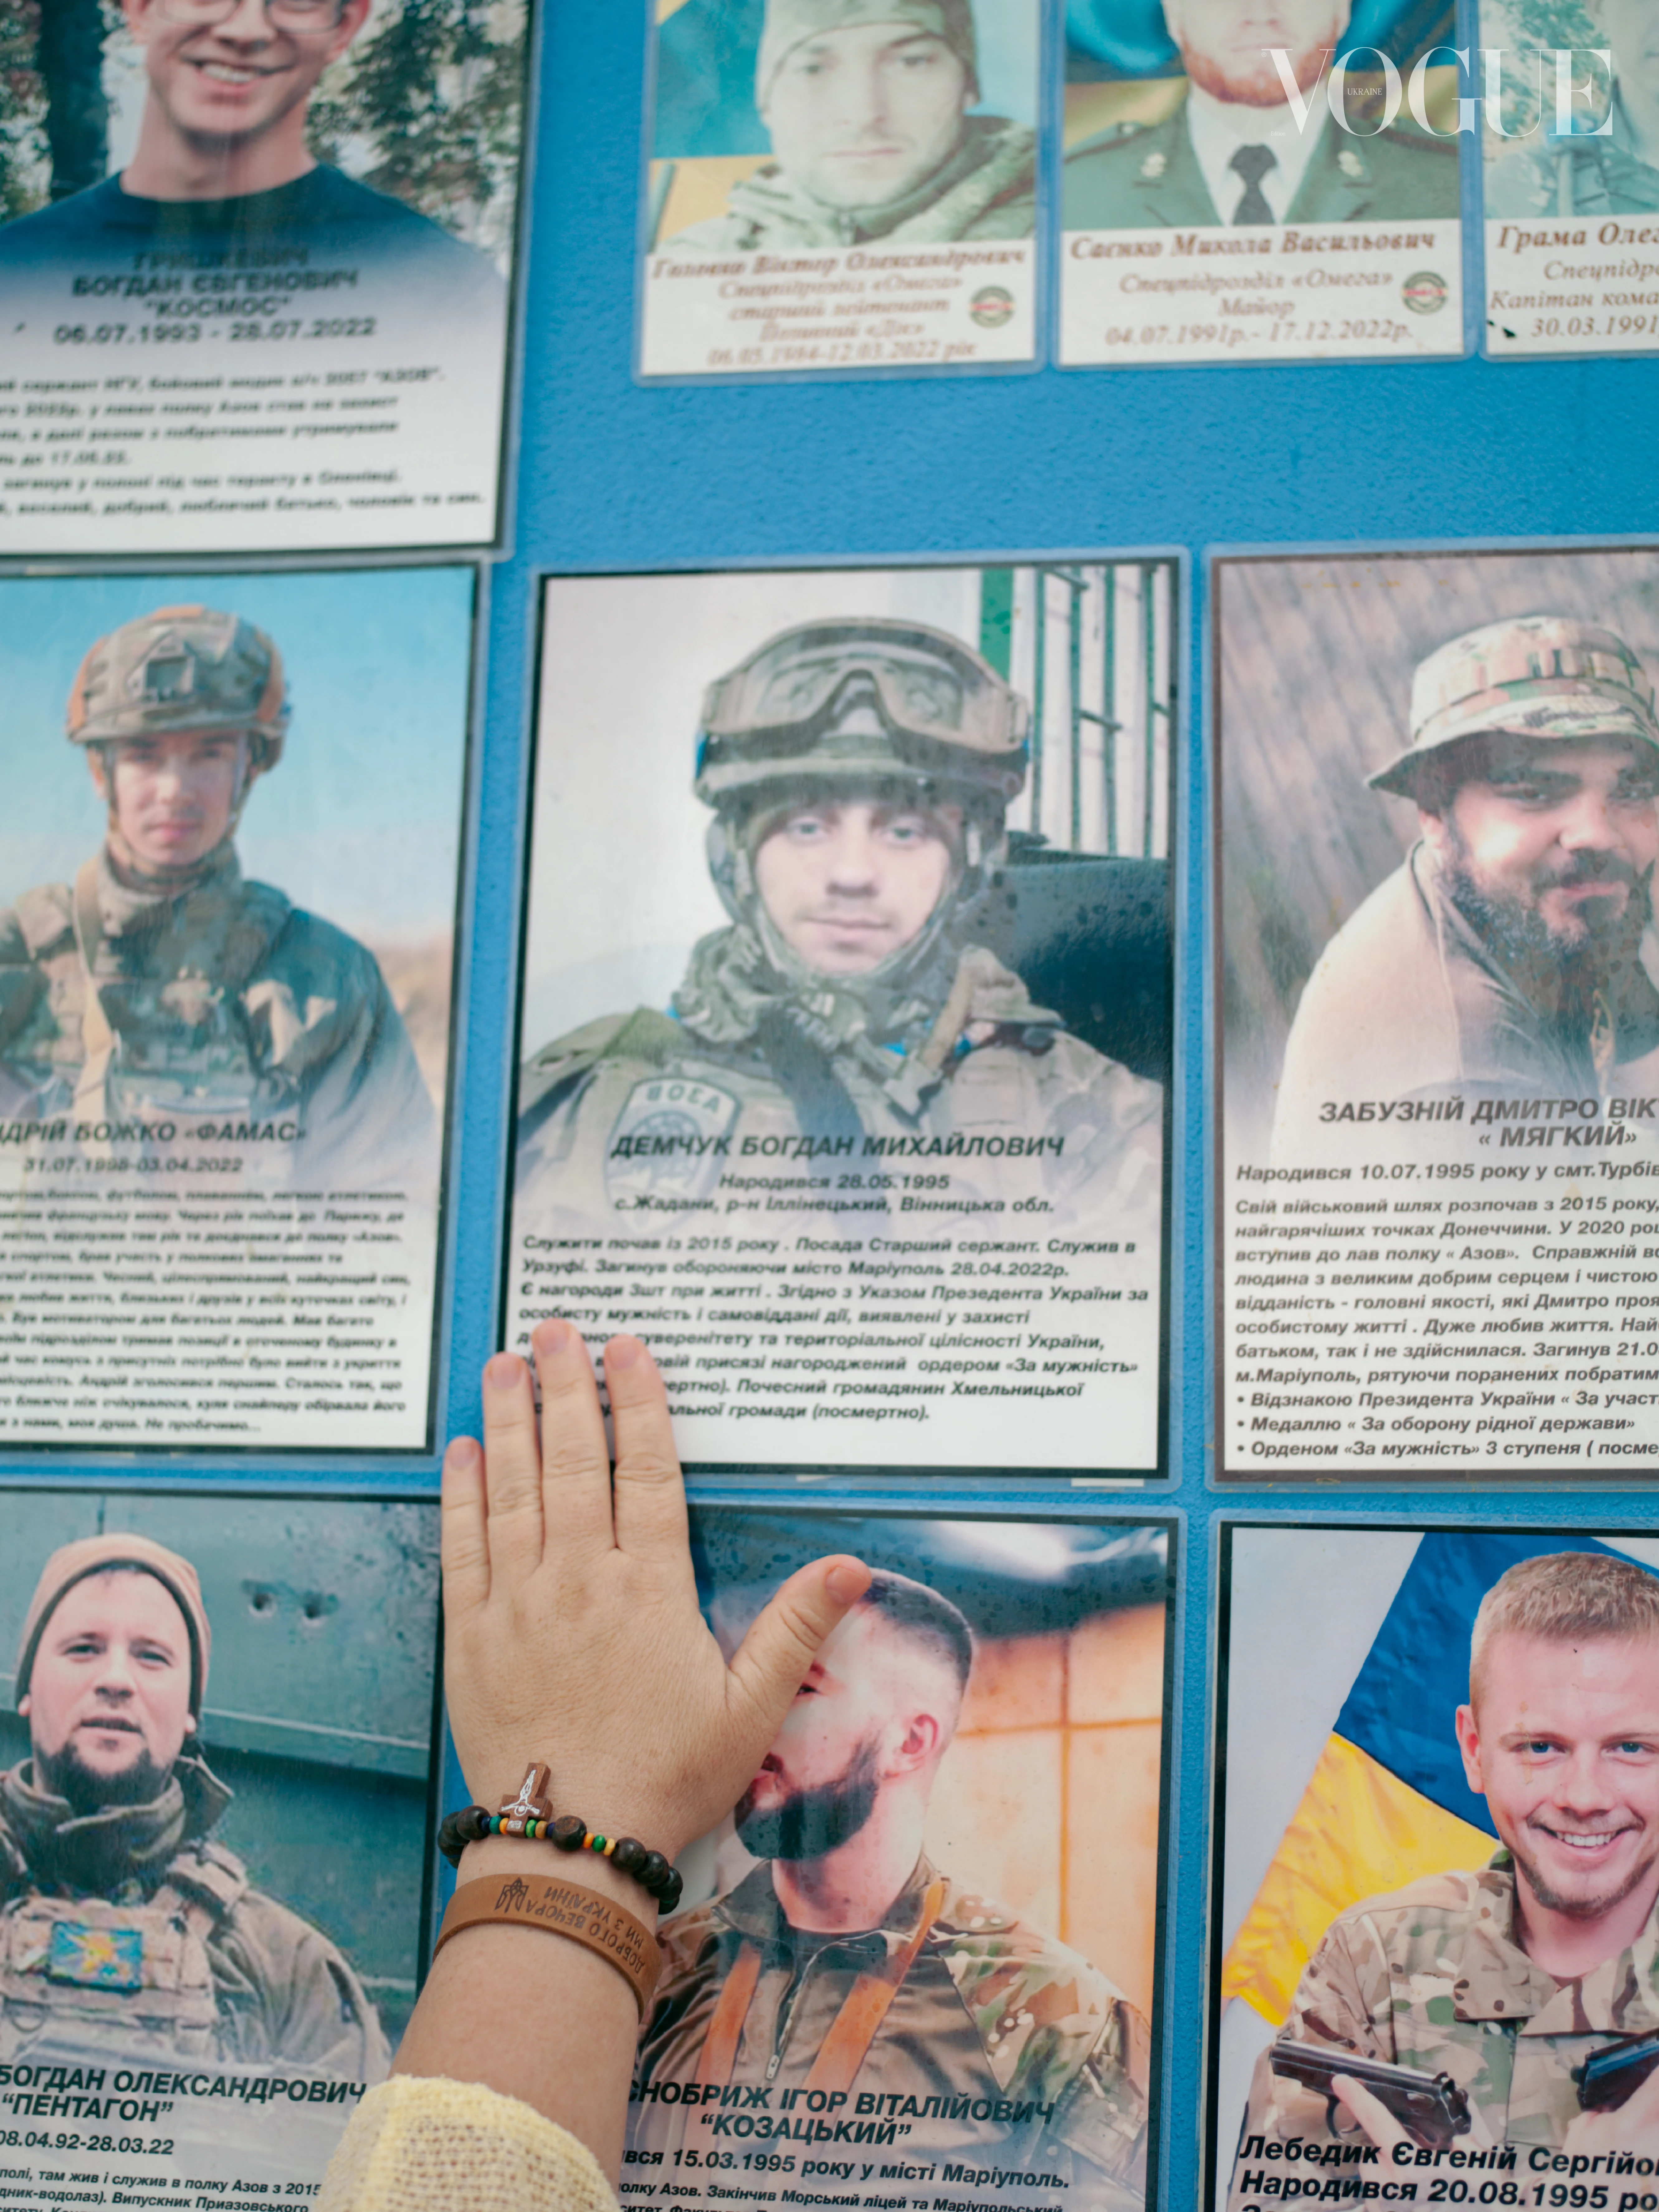 The photo of Bohdan Demchuk on the Wall of Remembrance of the Fallen for Ukraine near St. Michael's Cathedral in Kyiv.